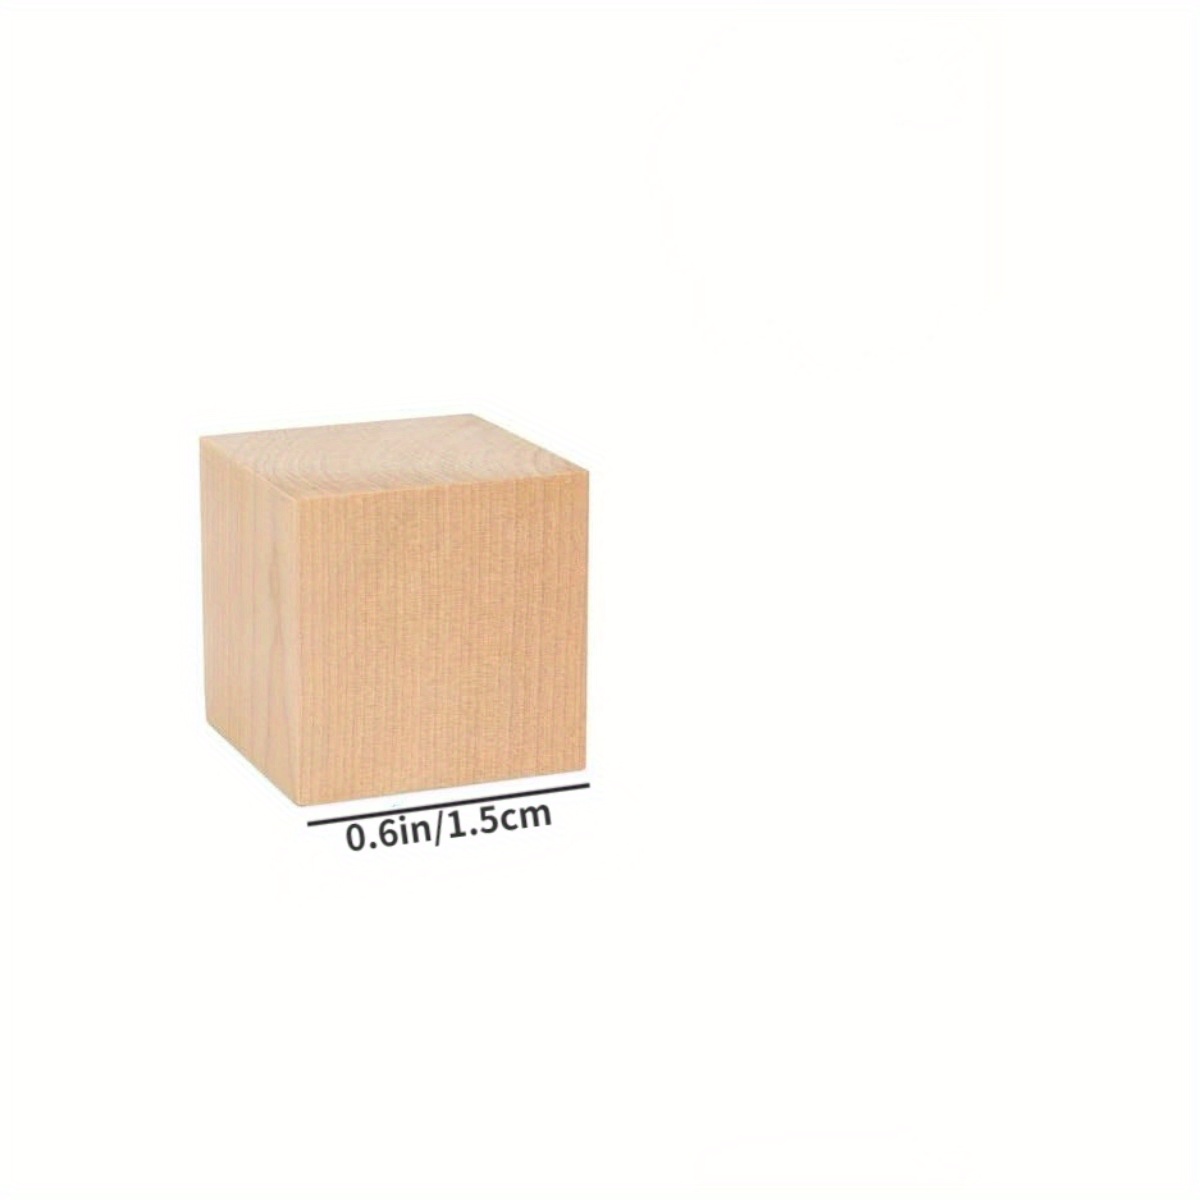 4 Large Wood Cubes, Pack of 1 Square Wood Block for DIY, Wooden Blocks for  Crafts and Decor, by Woodpeckers